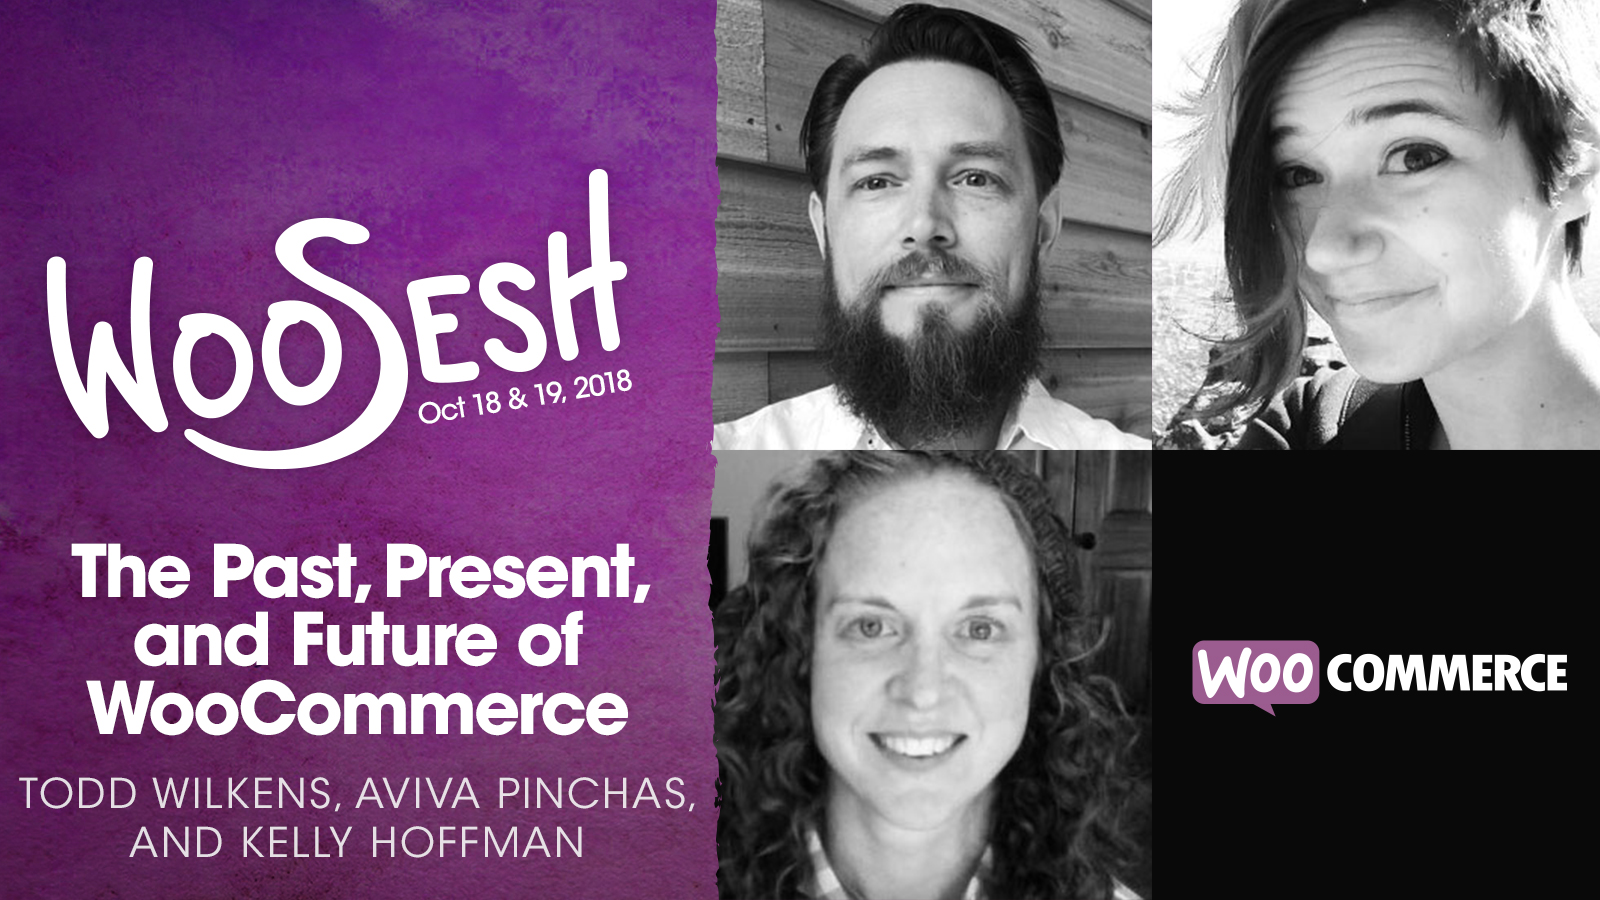 The Past, Present, and Future of WooCommerce